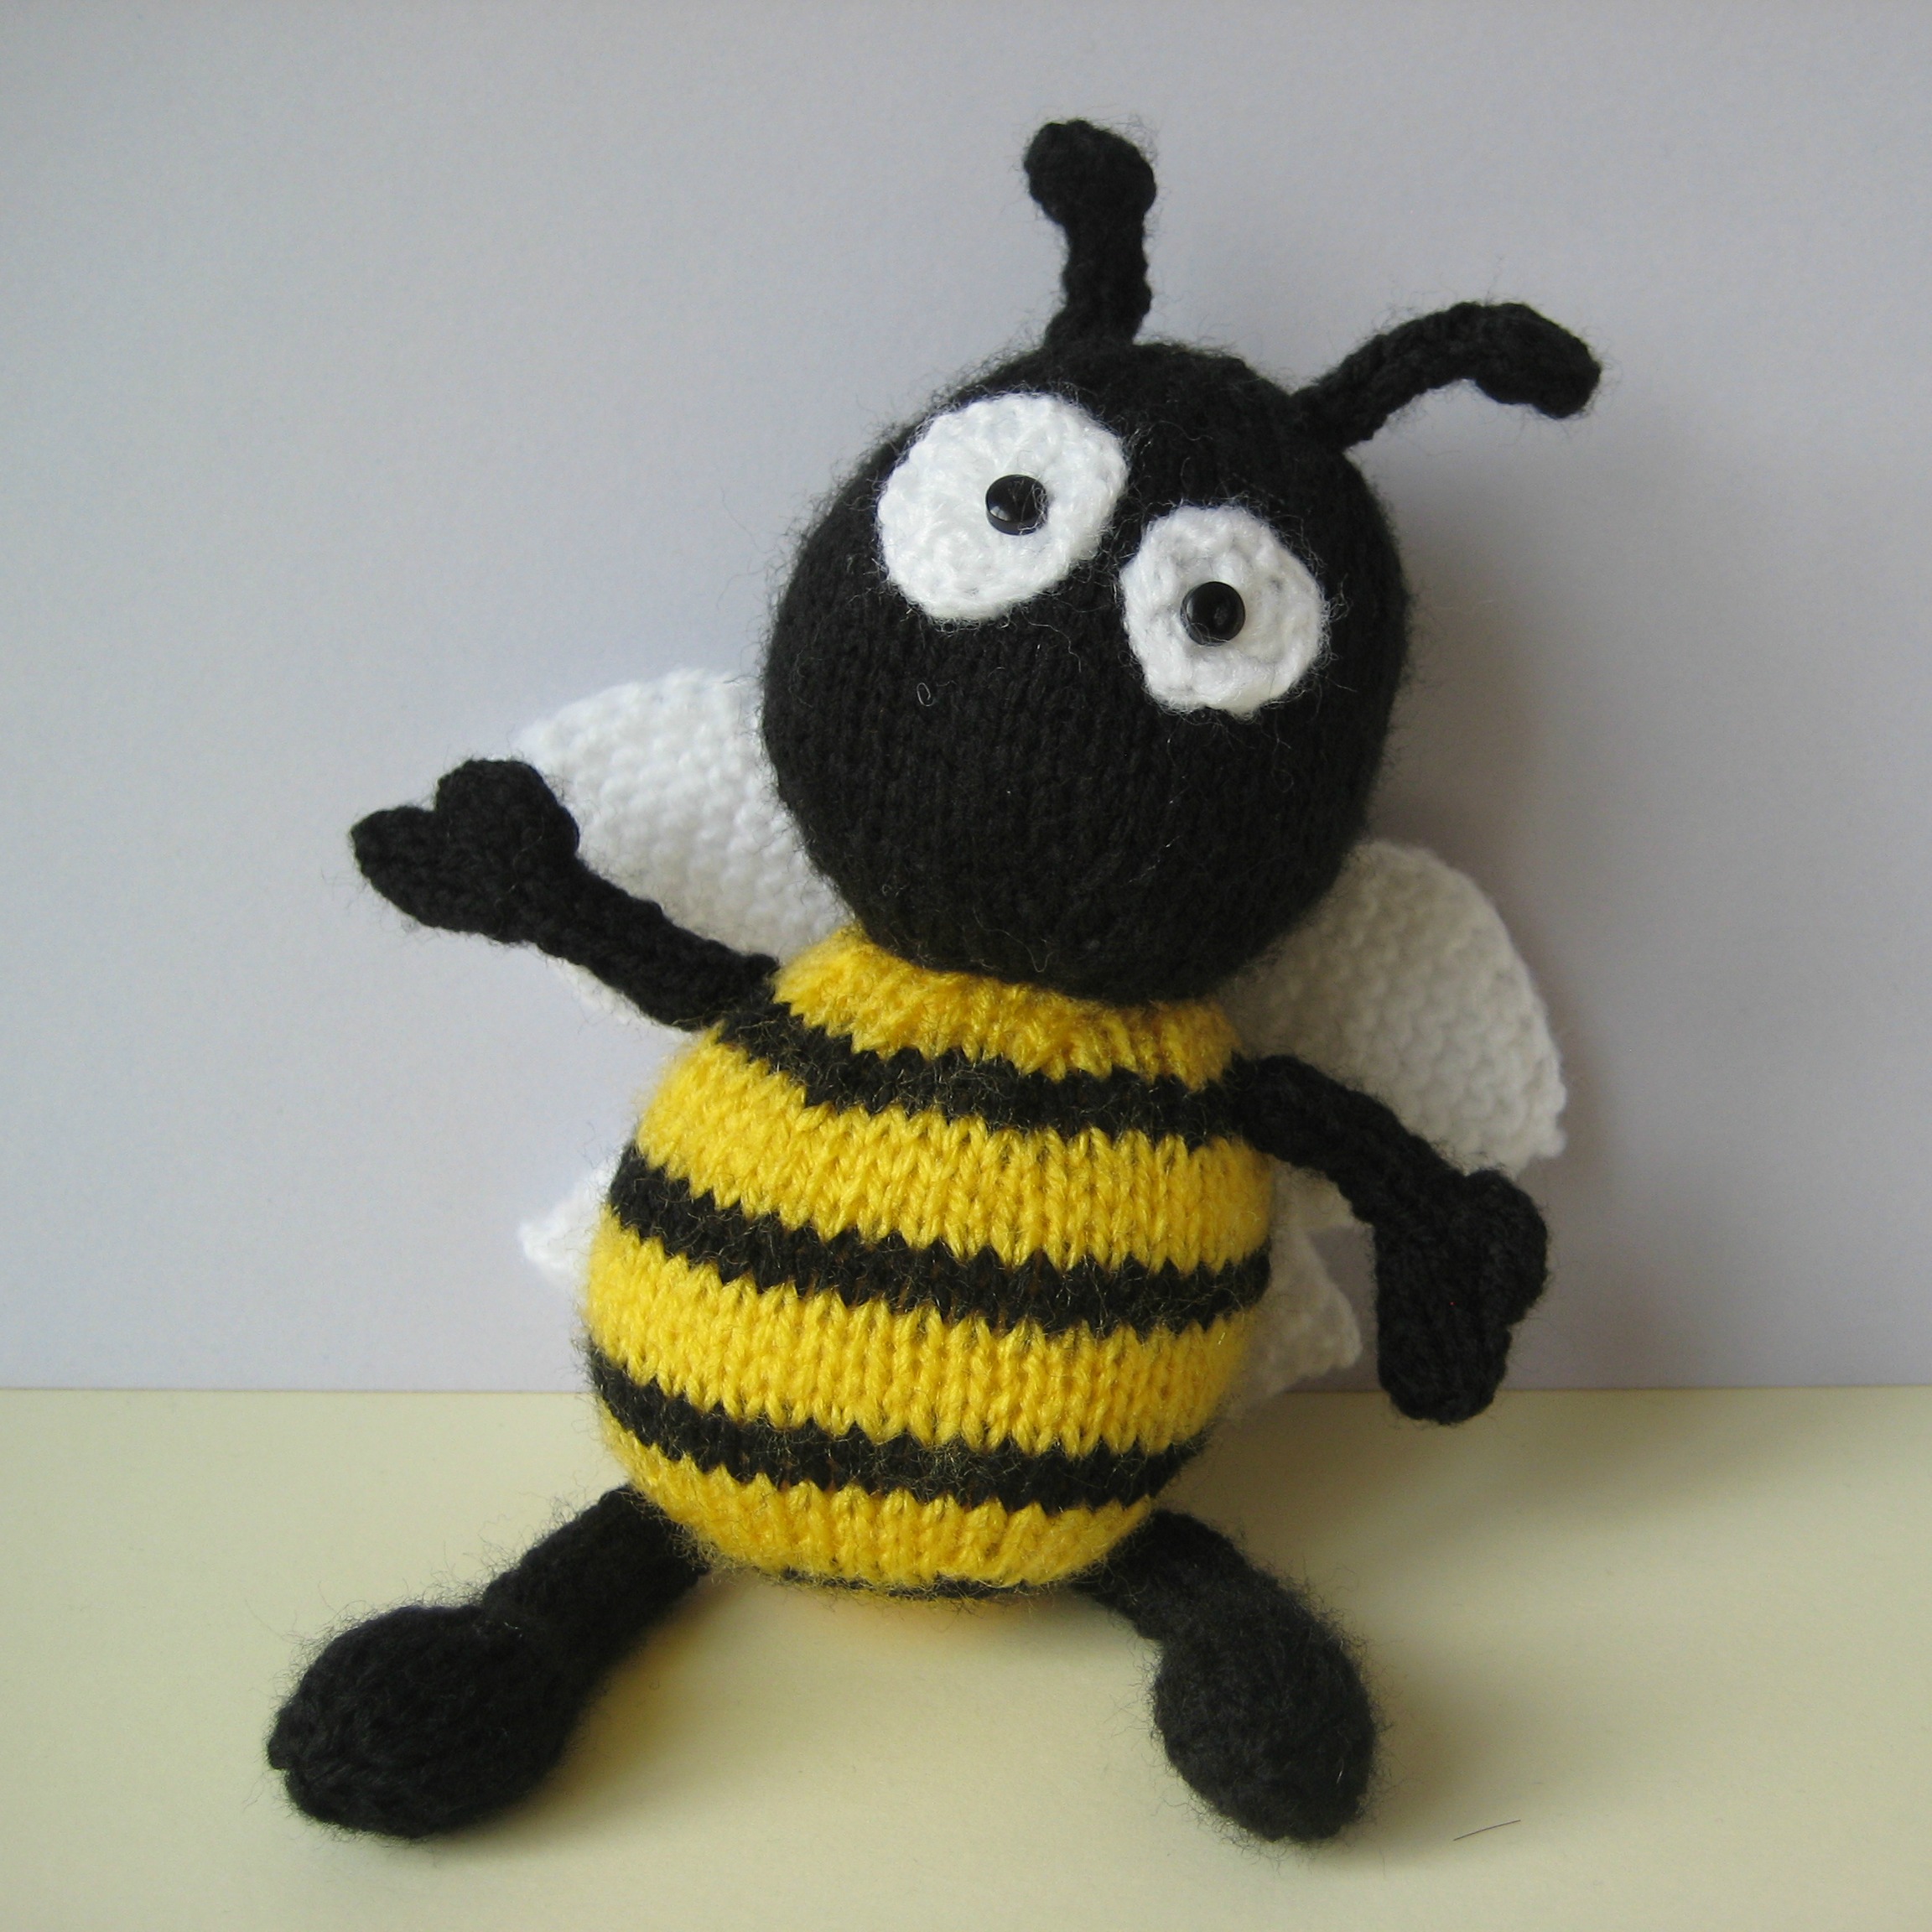 Bumble The Bee Toy Knitting Patterns on Luulla